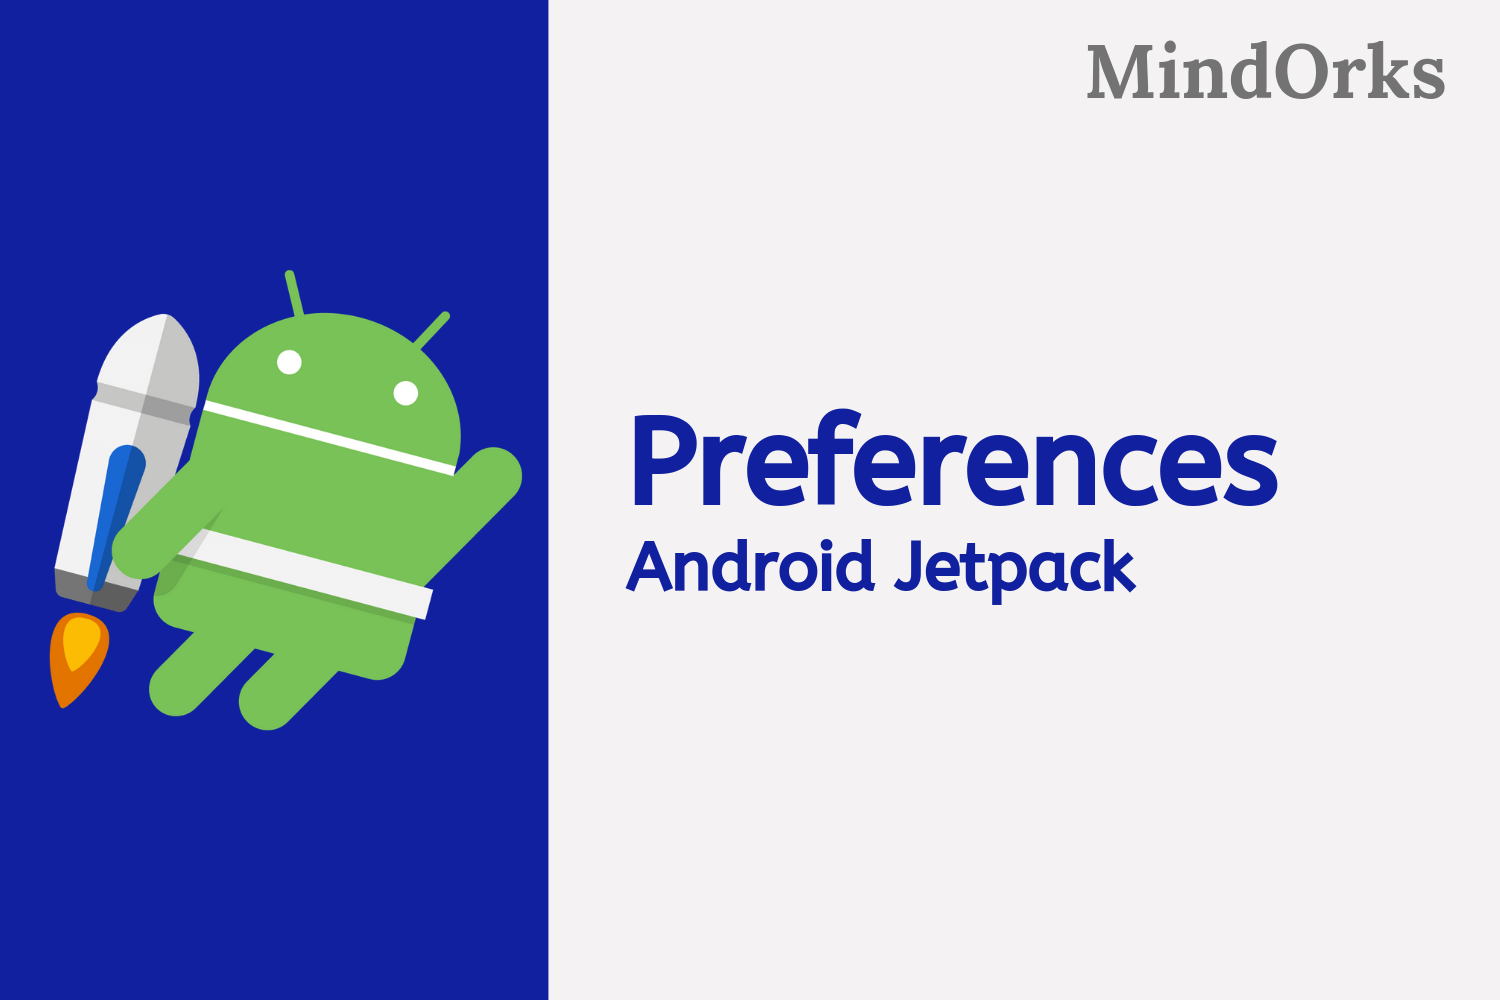 Implementing Android Jetpack Preferences